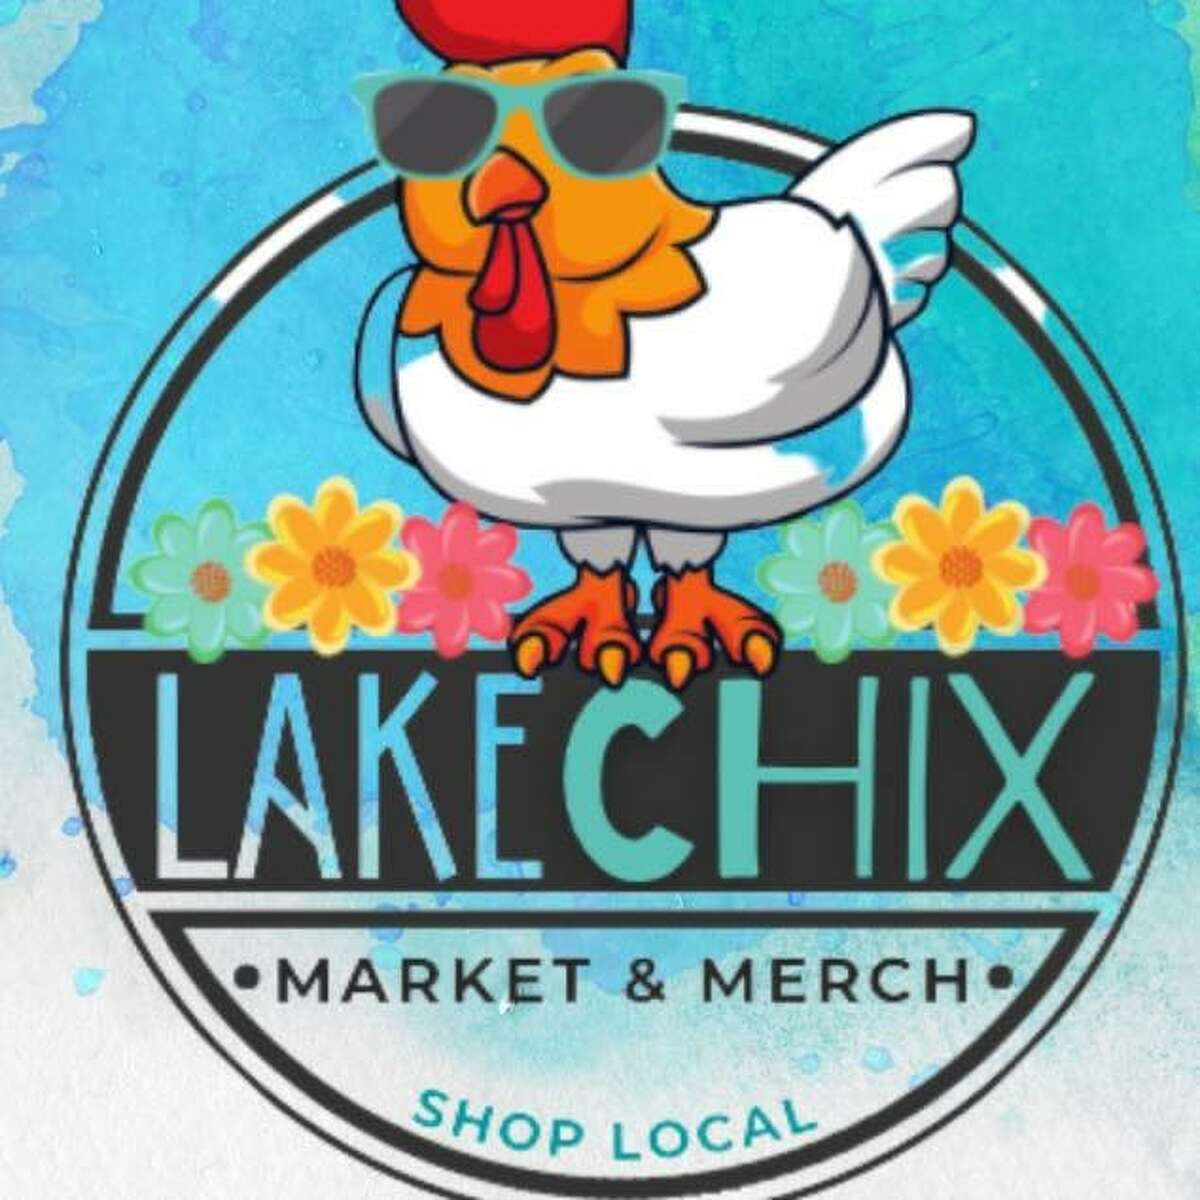 The Lake Chix Market and Merch will start Wednesday, June 22 from 4-8 p.m. at 100 Elm Drive in Edwardsville.